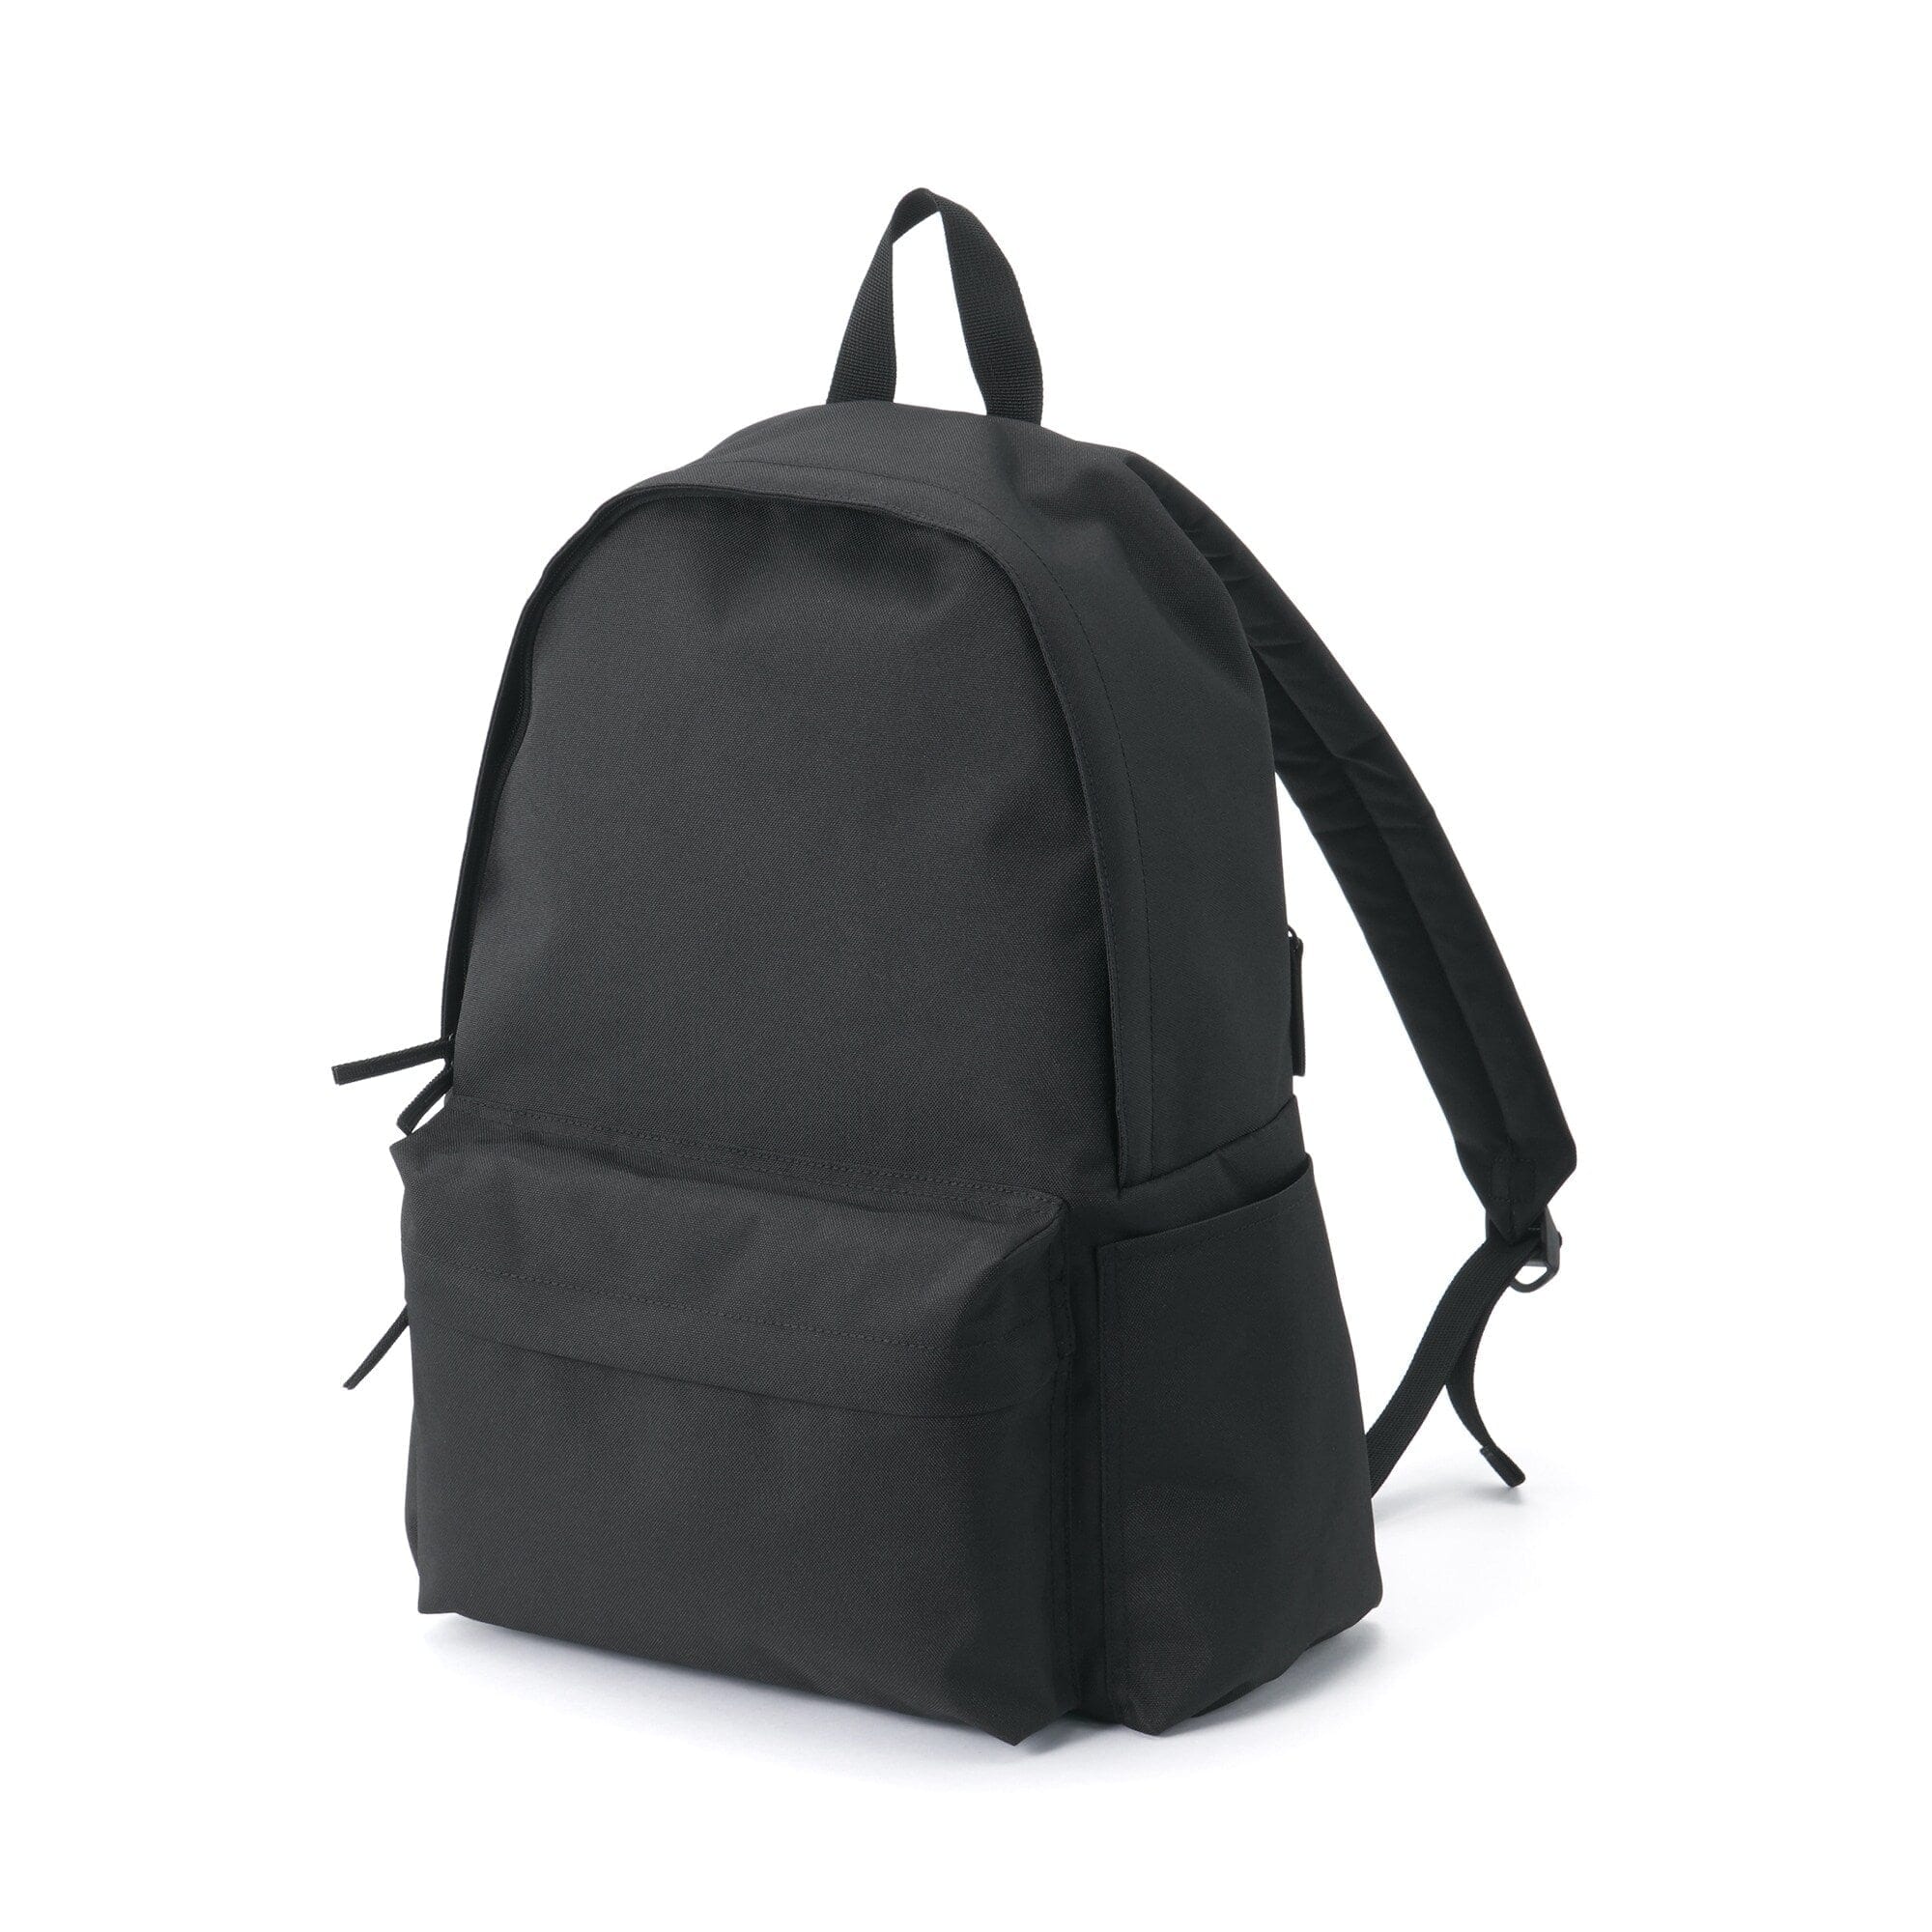 Less Tiring Water Repellent Backpack